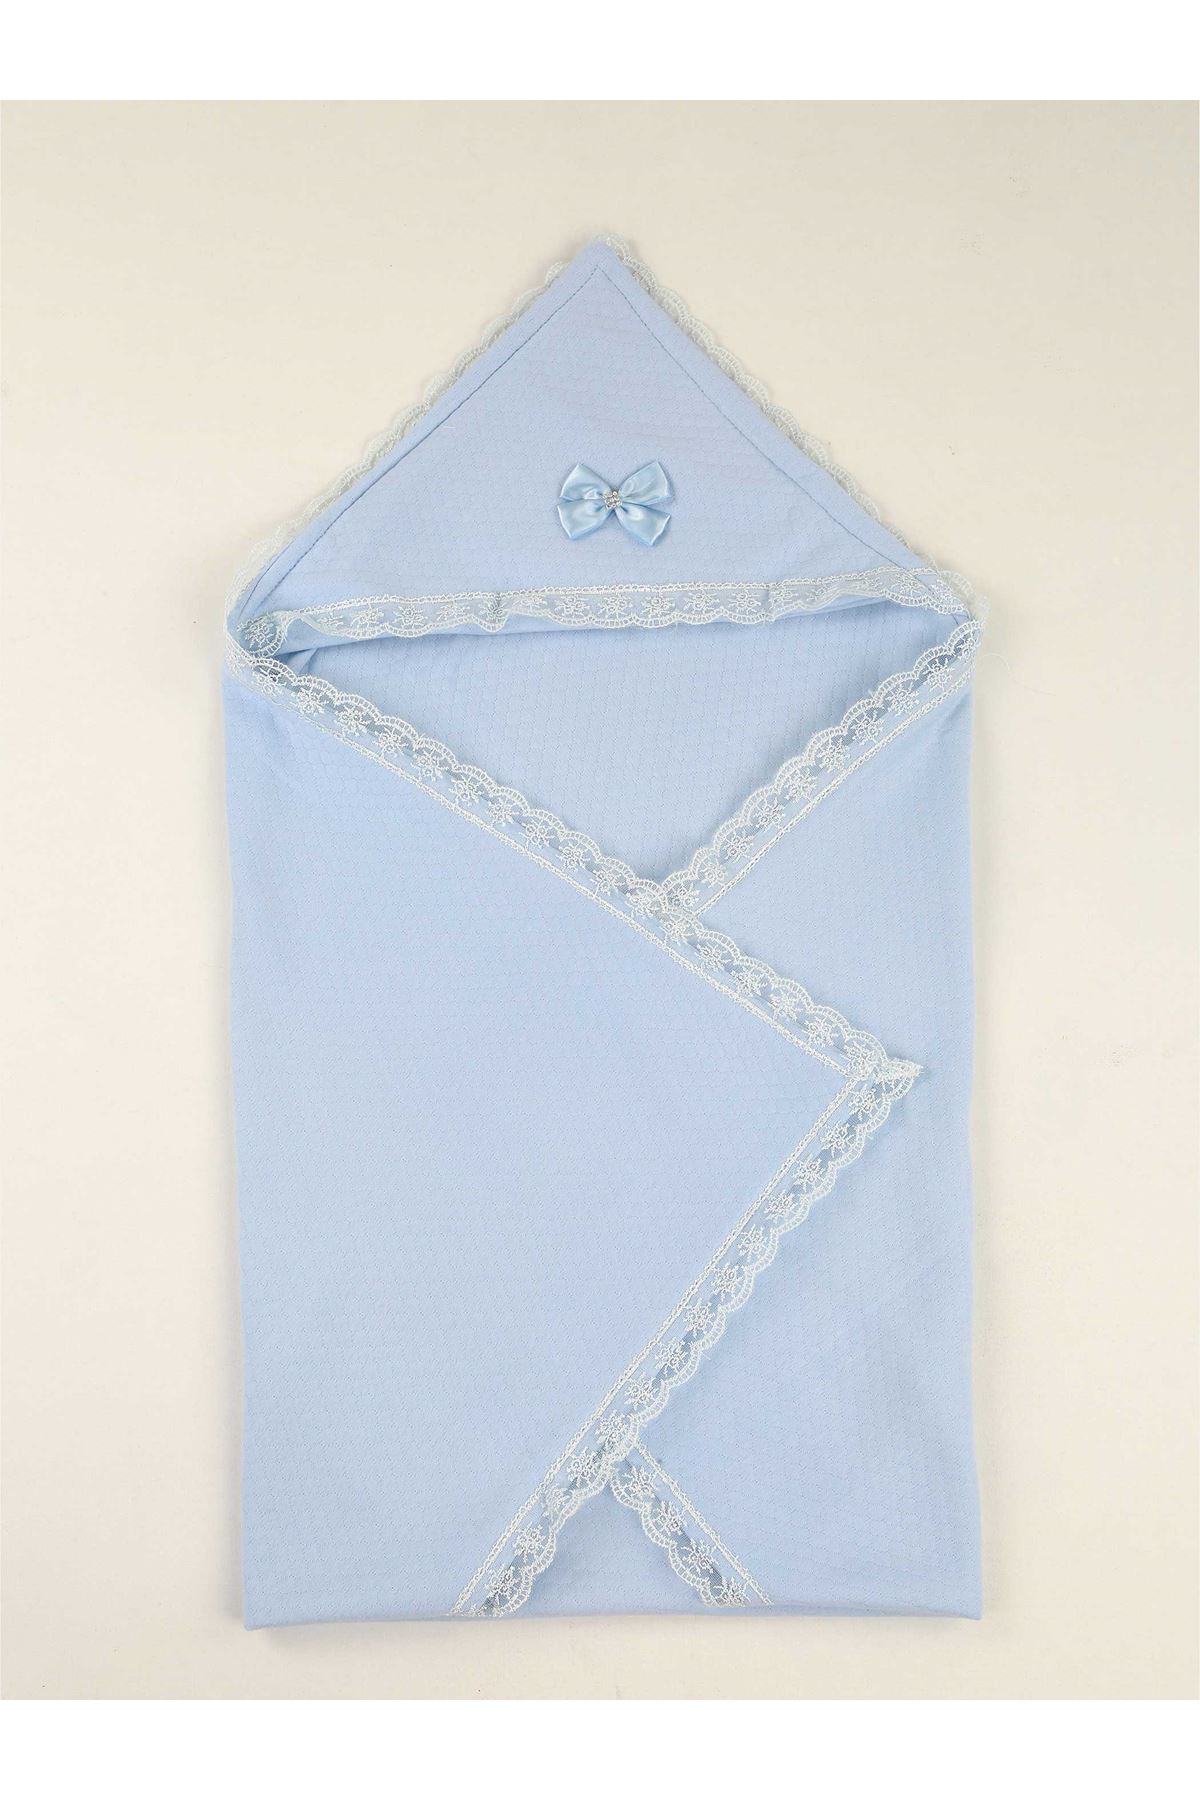 Blue 85 X85 cm Male Baby Swaddle Blanket